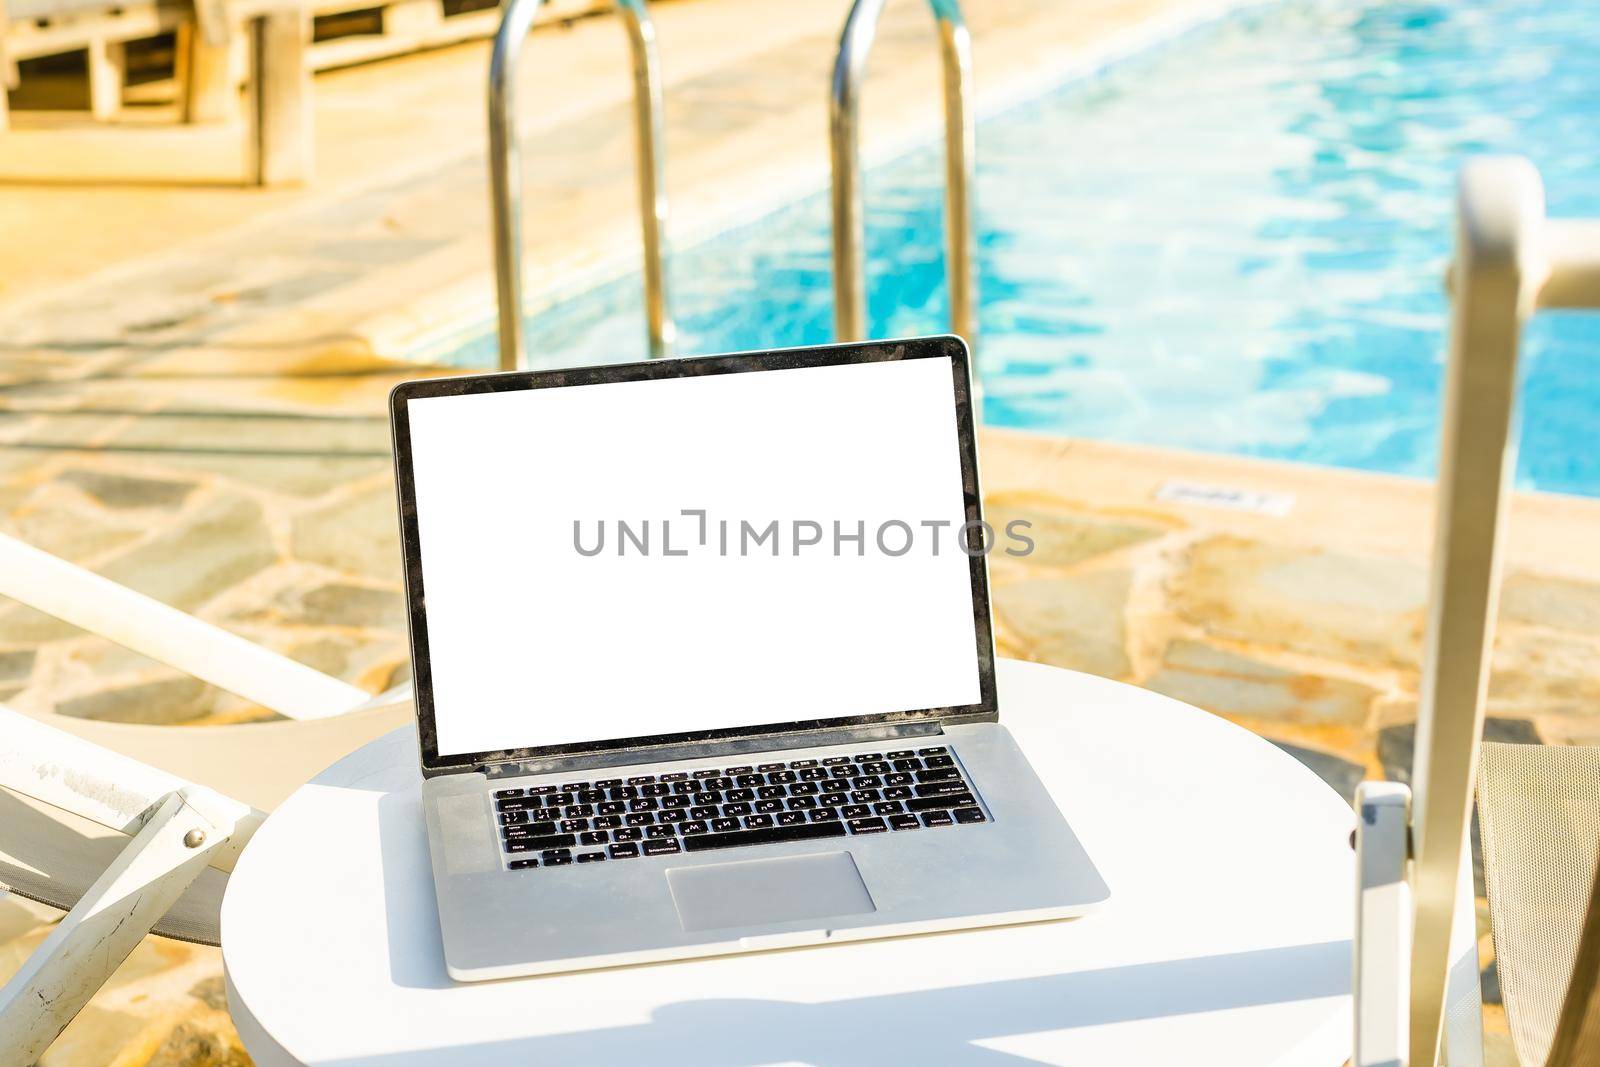 A laptop with an empty screen stands in the courtyard of a beautiful home garden, in Sunny weather